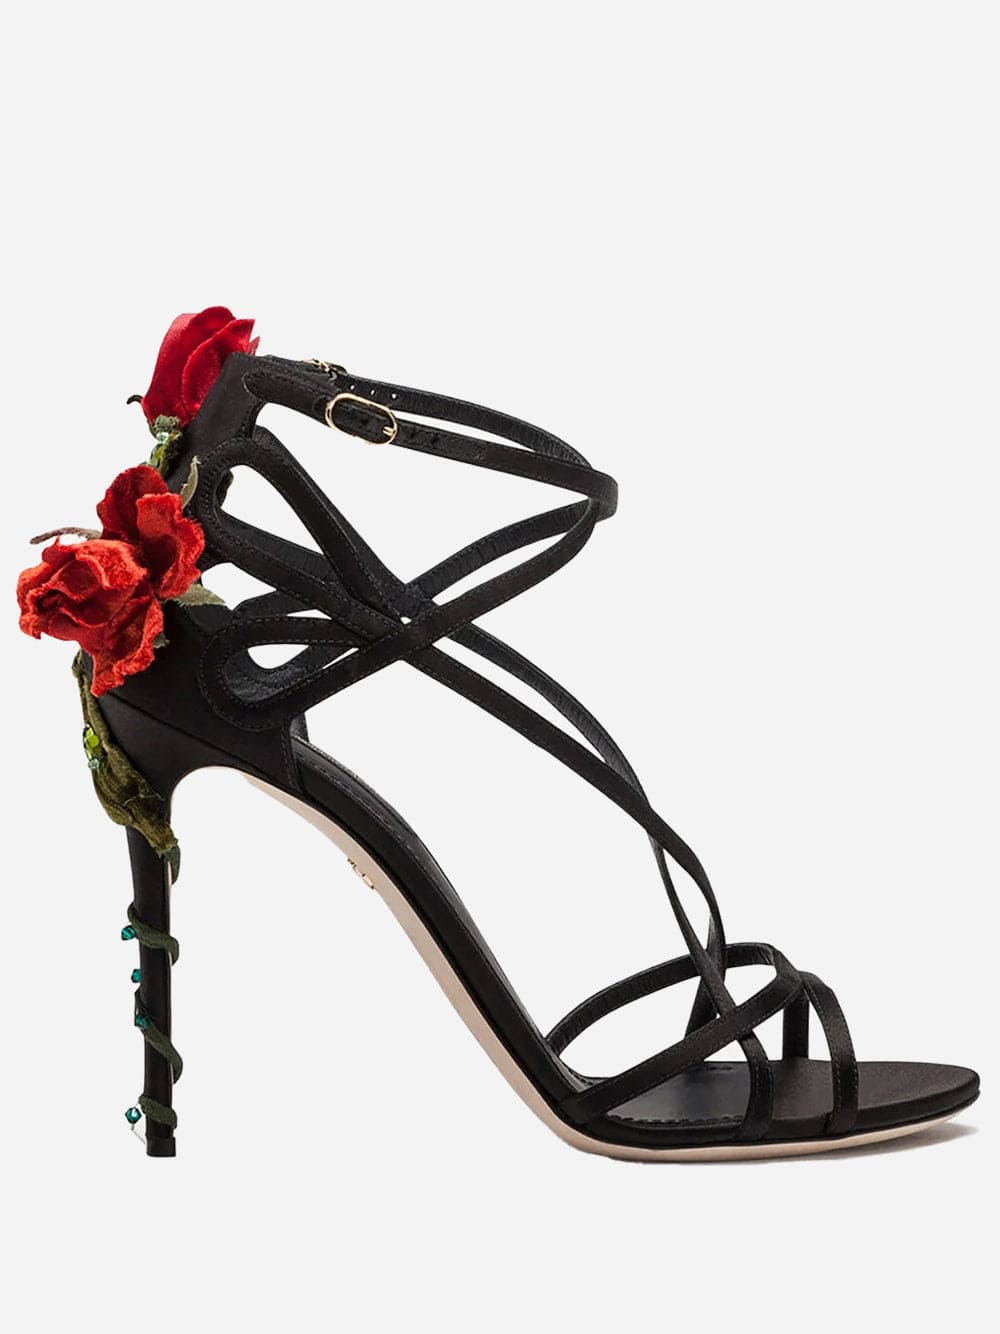 Dolce & Gabbana Rose Embroidery Sandals